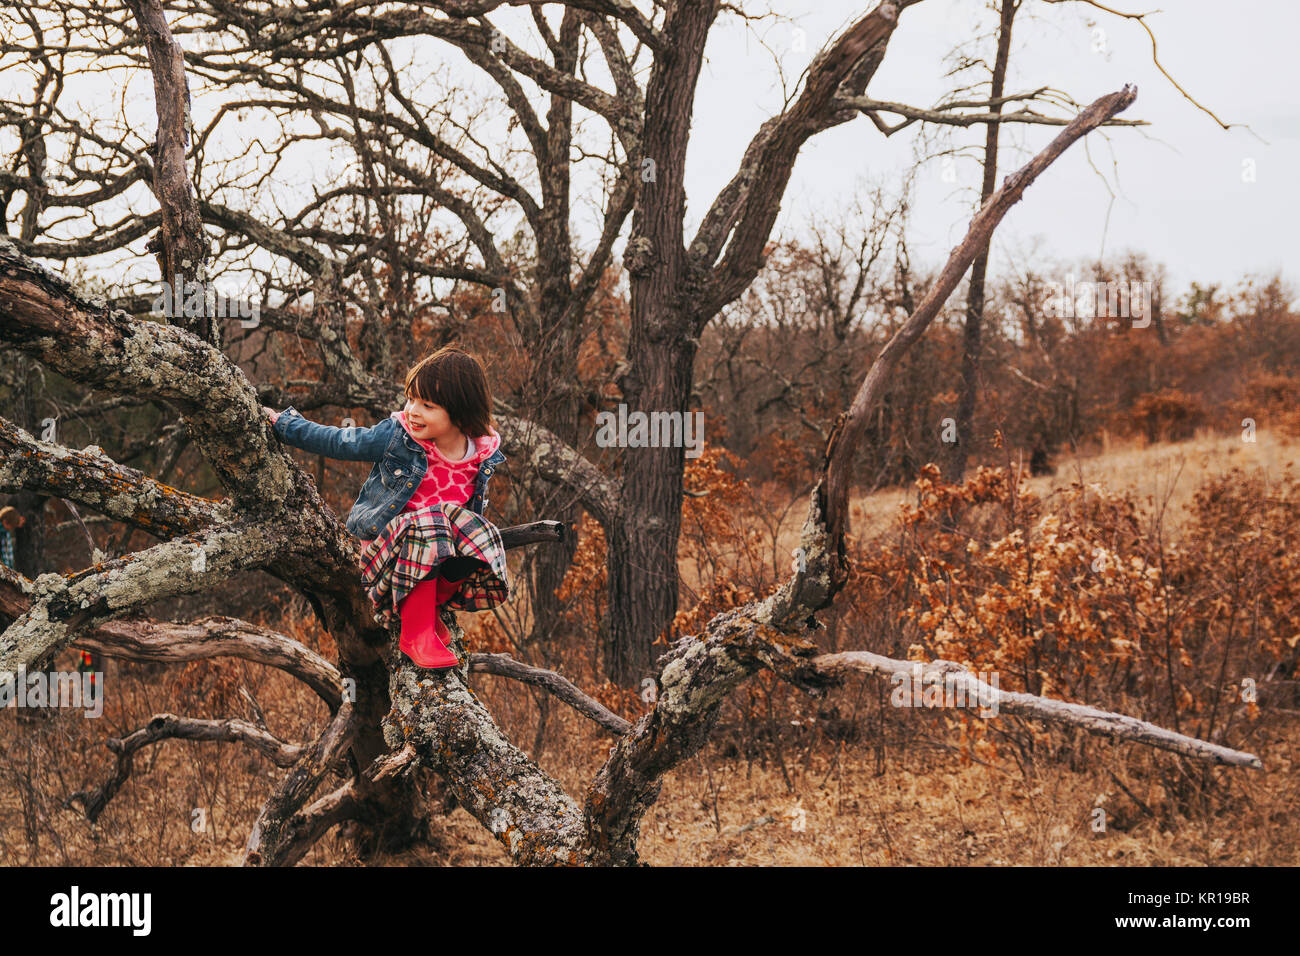 Girl climbing in a tree Banque D'Images